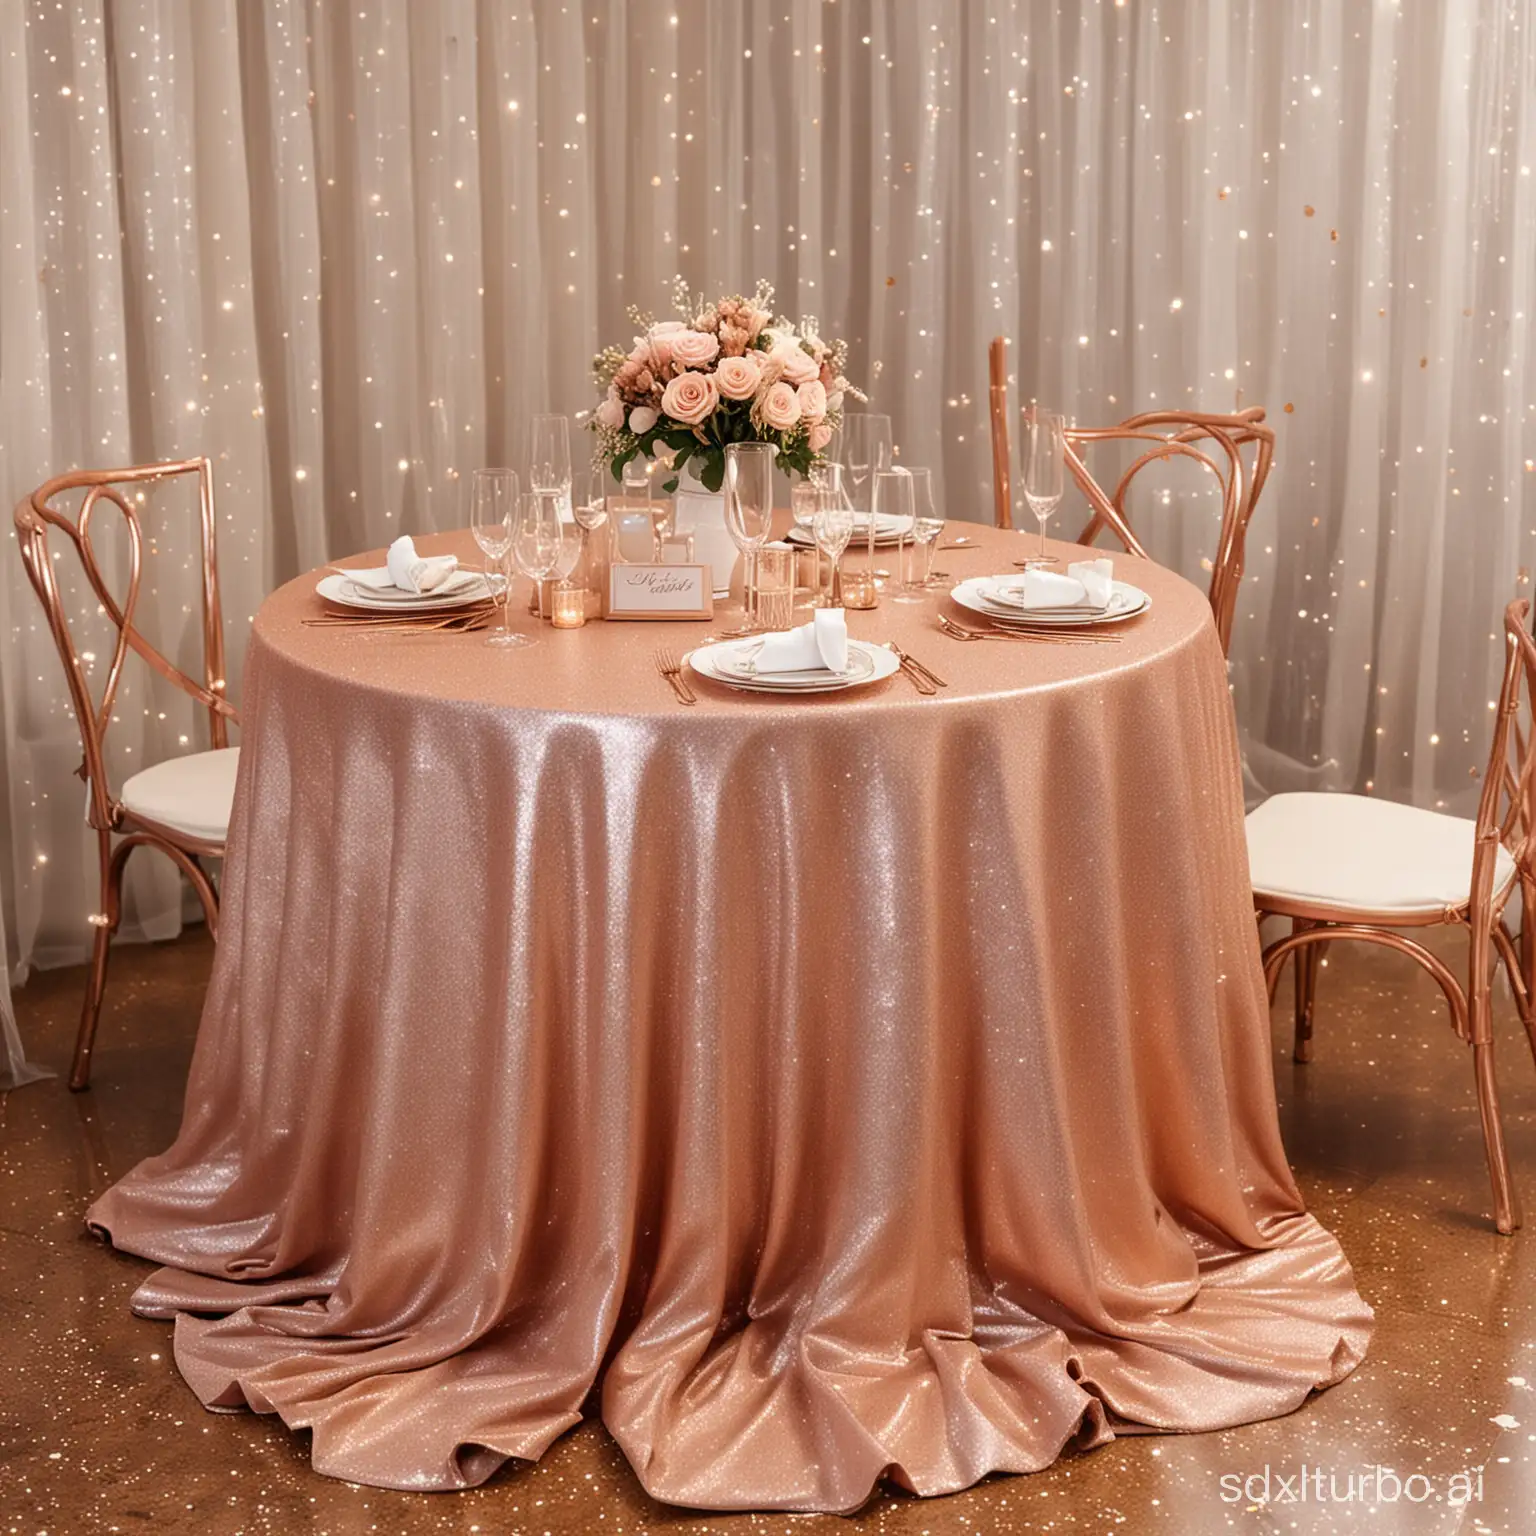 At the wedding scene, tables, glitter tablecloths, rosegold